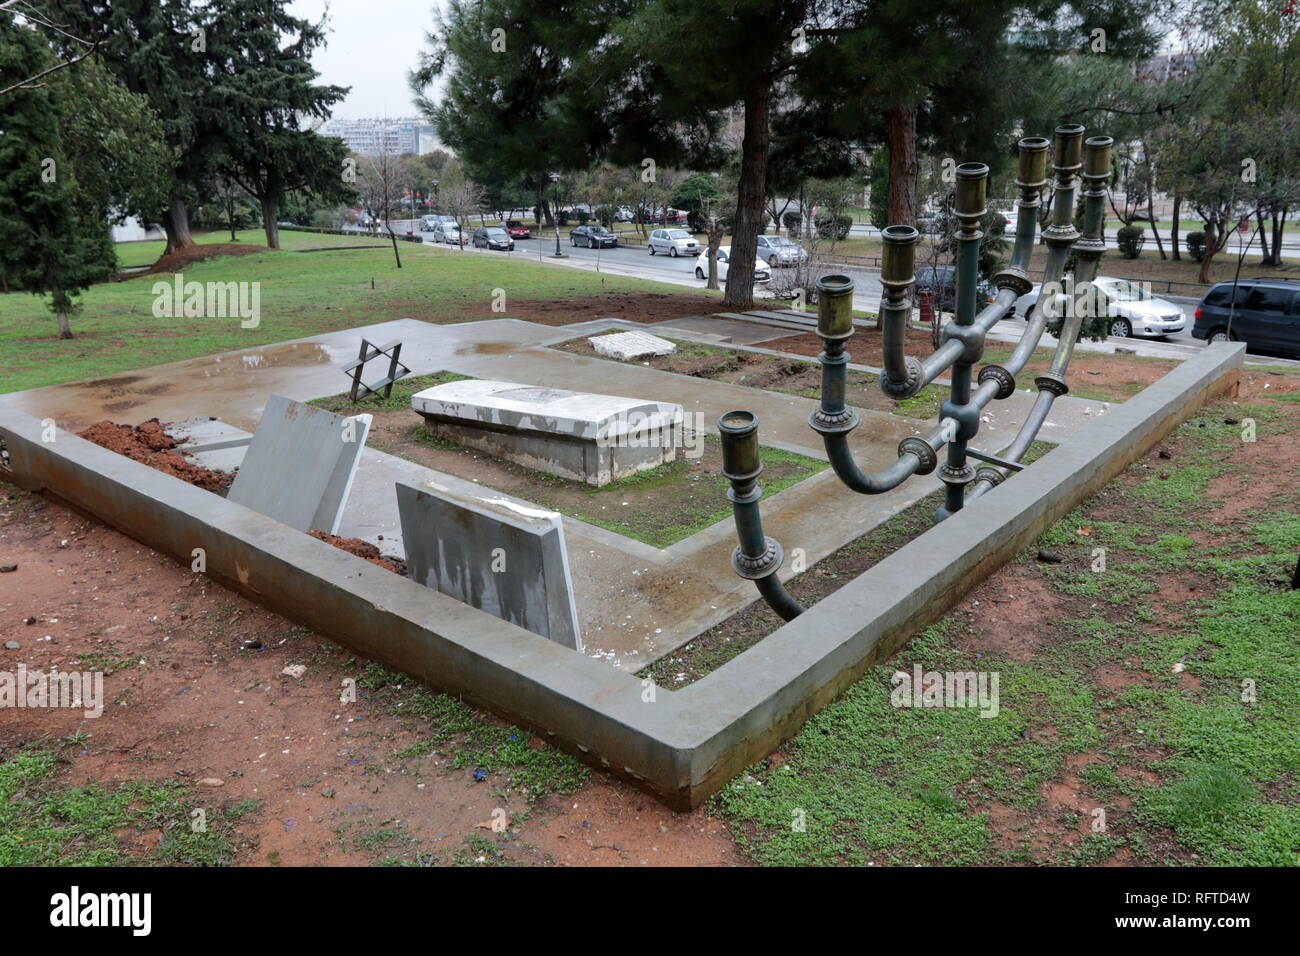 Thessaloniki, Greece. 26th Jan, 2019. Vandals smashed a memorial to the Jewish cemetery on the campus of the Aristotle University of Thessaloniki. The campus monument commemorates the former centuries old Jewish cemetery of the city which was destroyed during the WW II. Credit: Orhan Tsolak/Alamy Live News Stock Photo